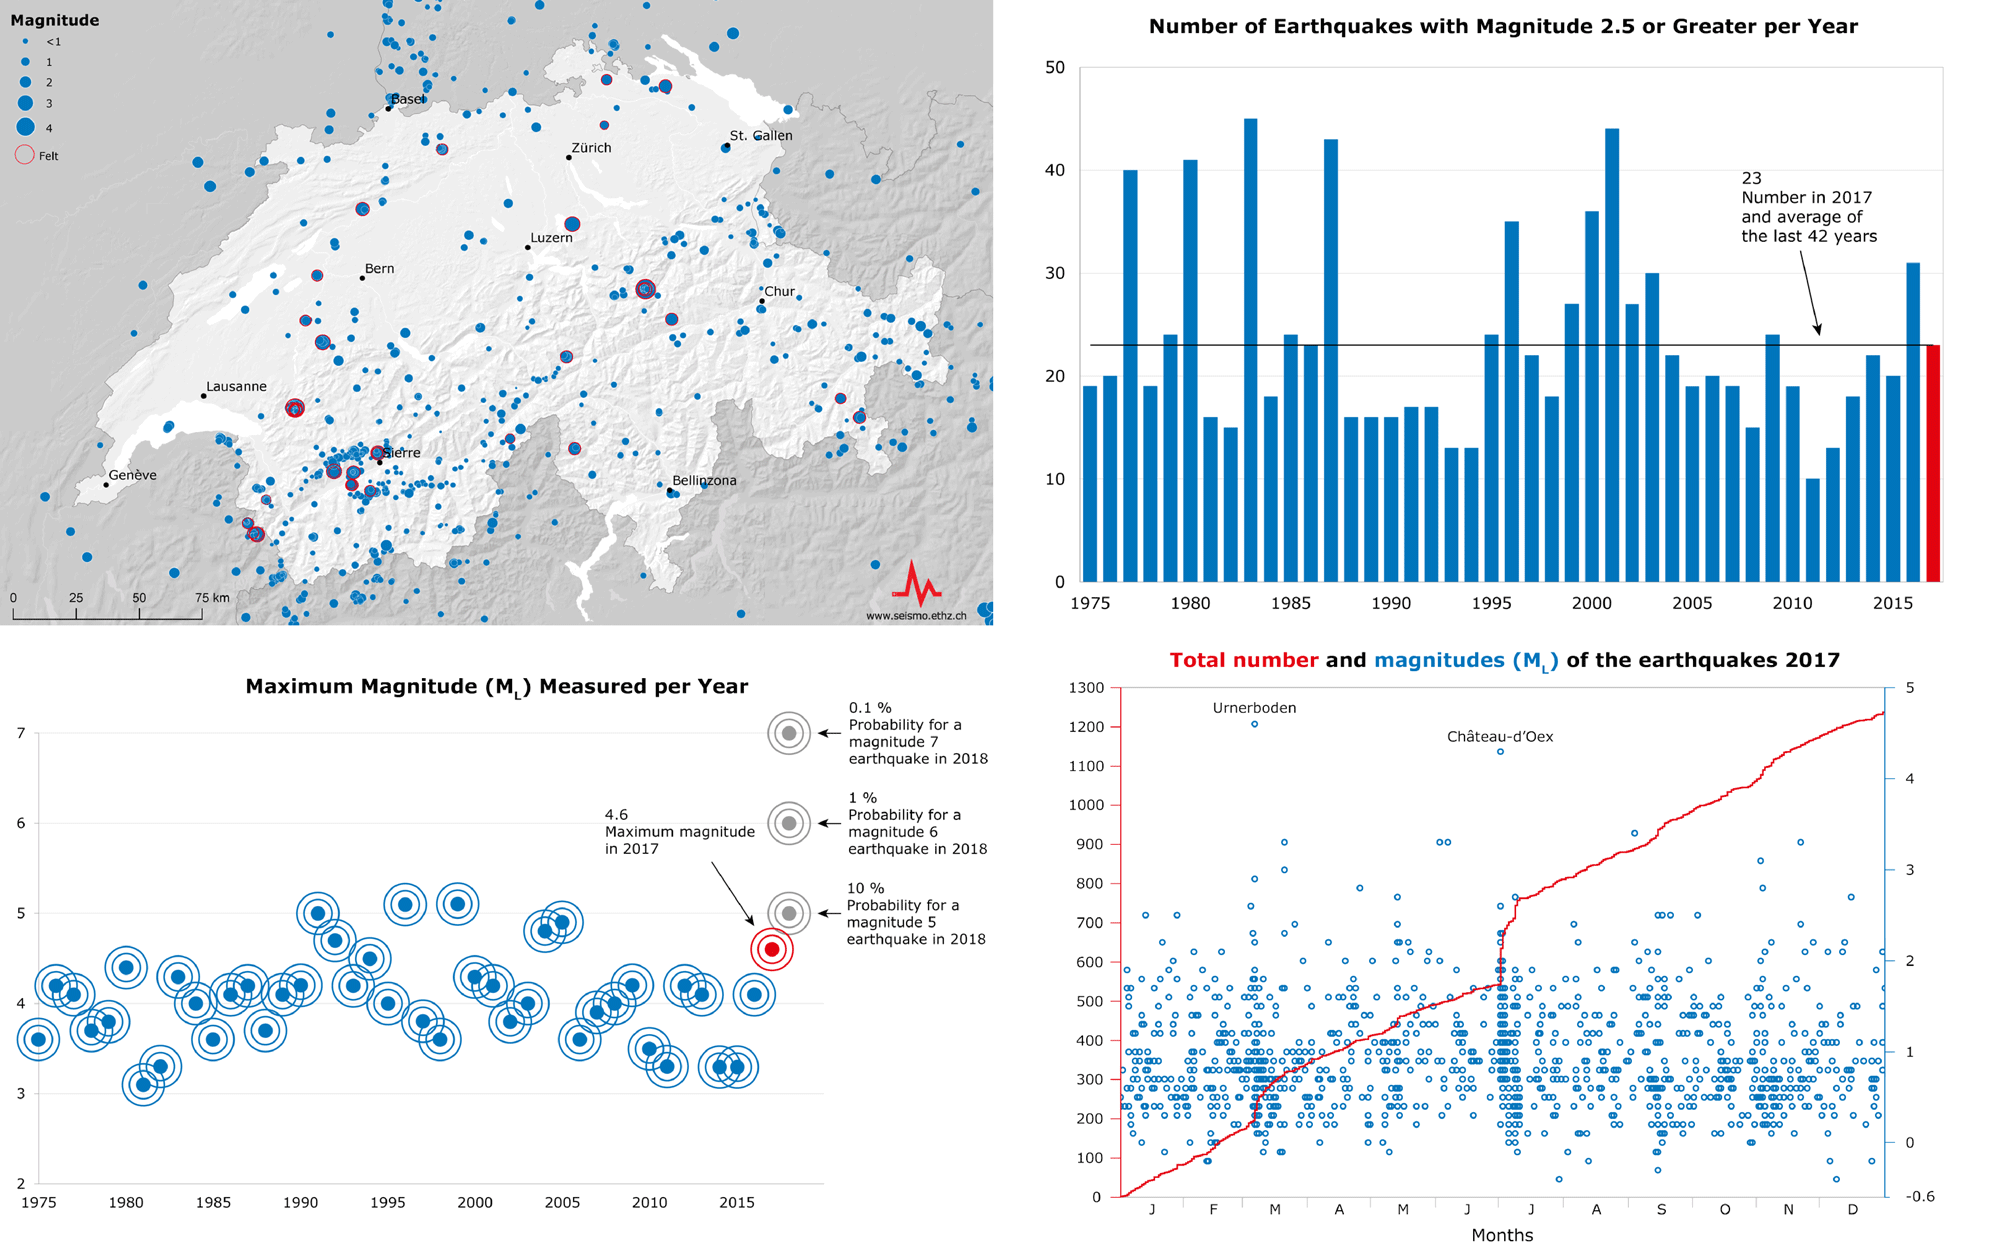 Earthquakes in Switzerland in 2017: an overview